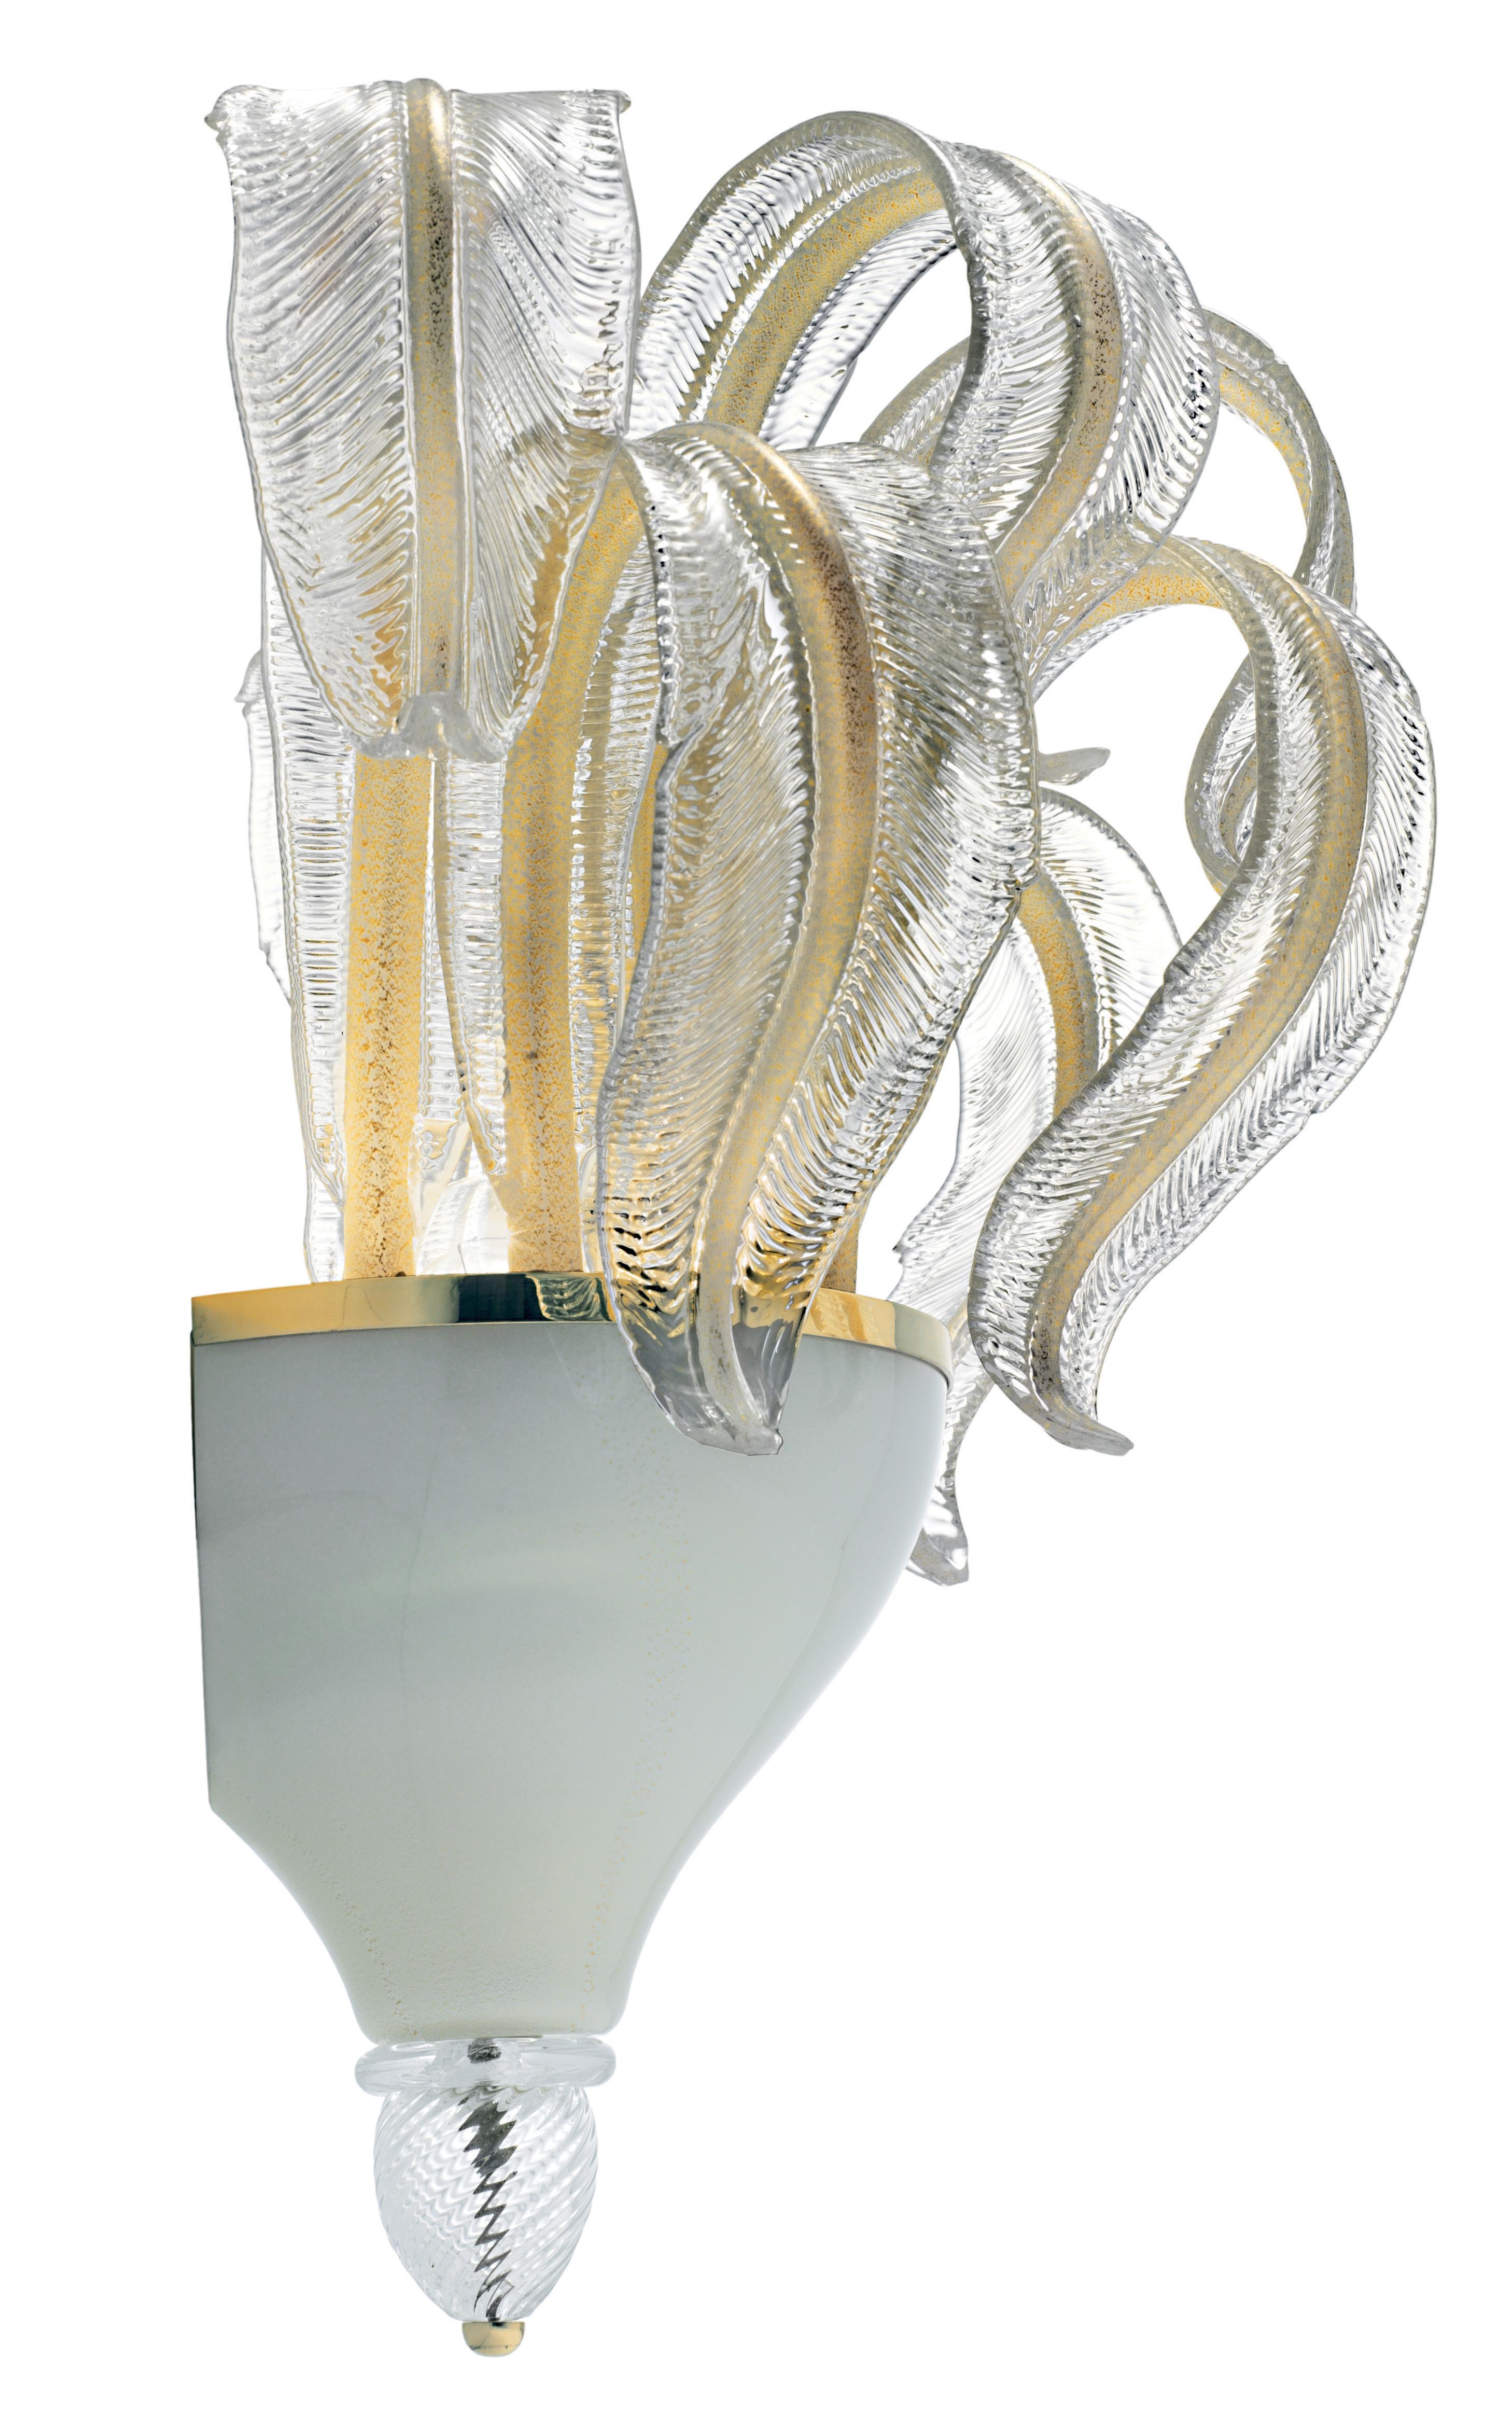 Here you are shown the Piume 5390 wall sconce in beige gold glass and polished brass finishing. The Piume is an outstanding series of suspension, ceiling lamps and wall sconces featuring elements fashioned with the traditional techniques of Murano